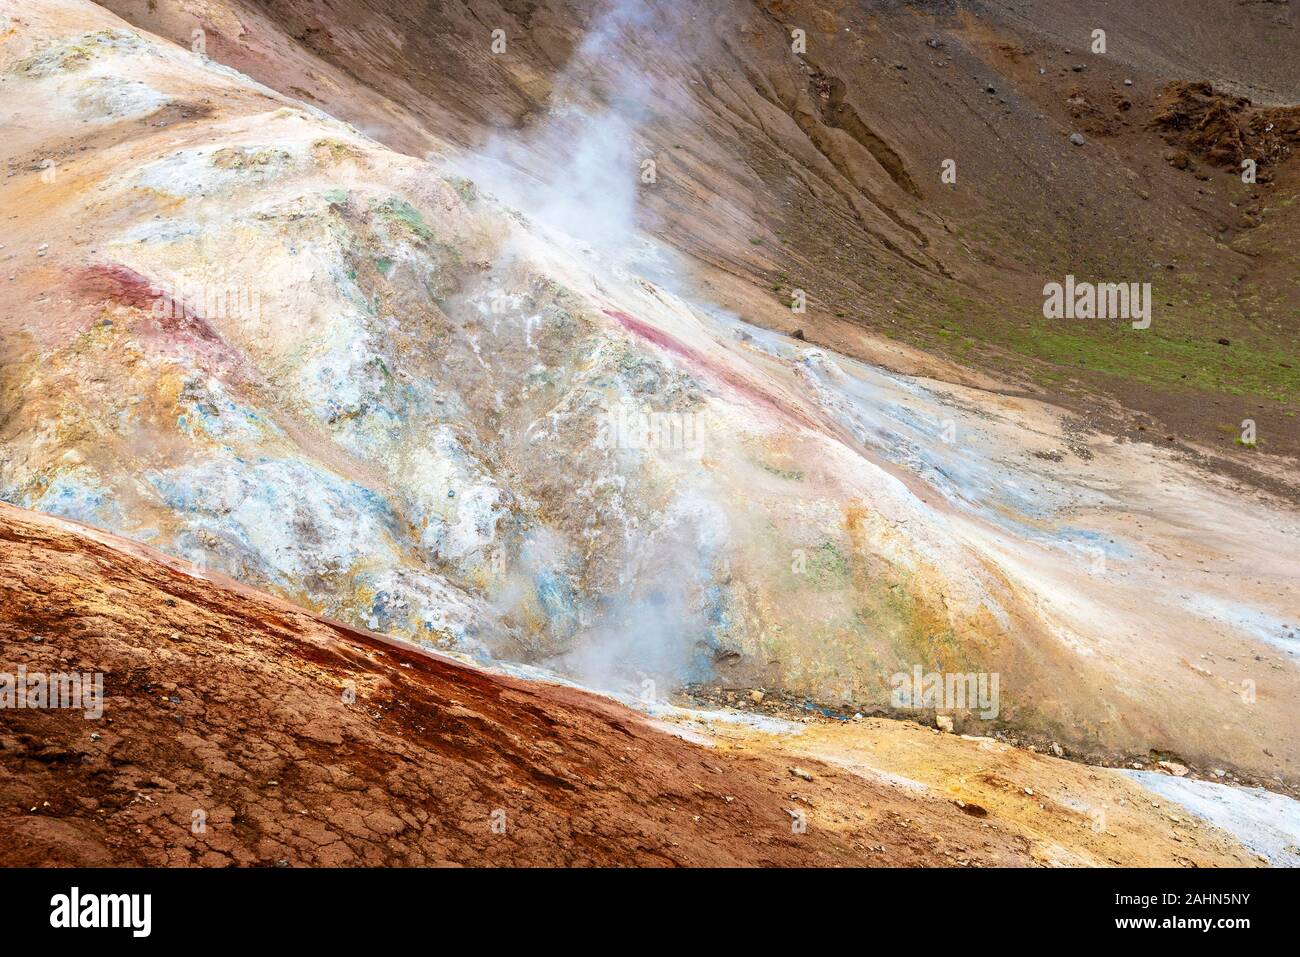 Solfatara and Fumarole activity in Krafla volcanic area in Northern Island. Sulfur deposits are in the ground surface of crater slope. Stock Photo